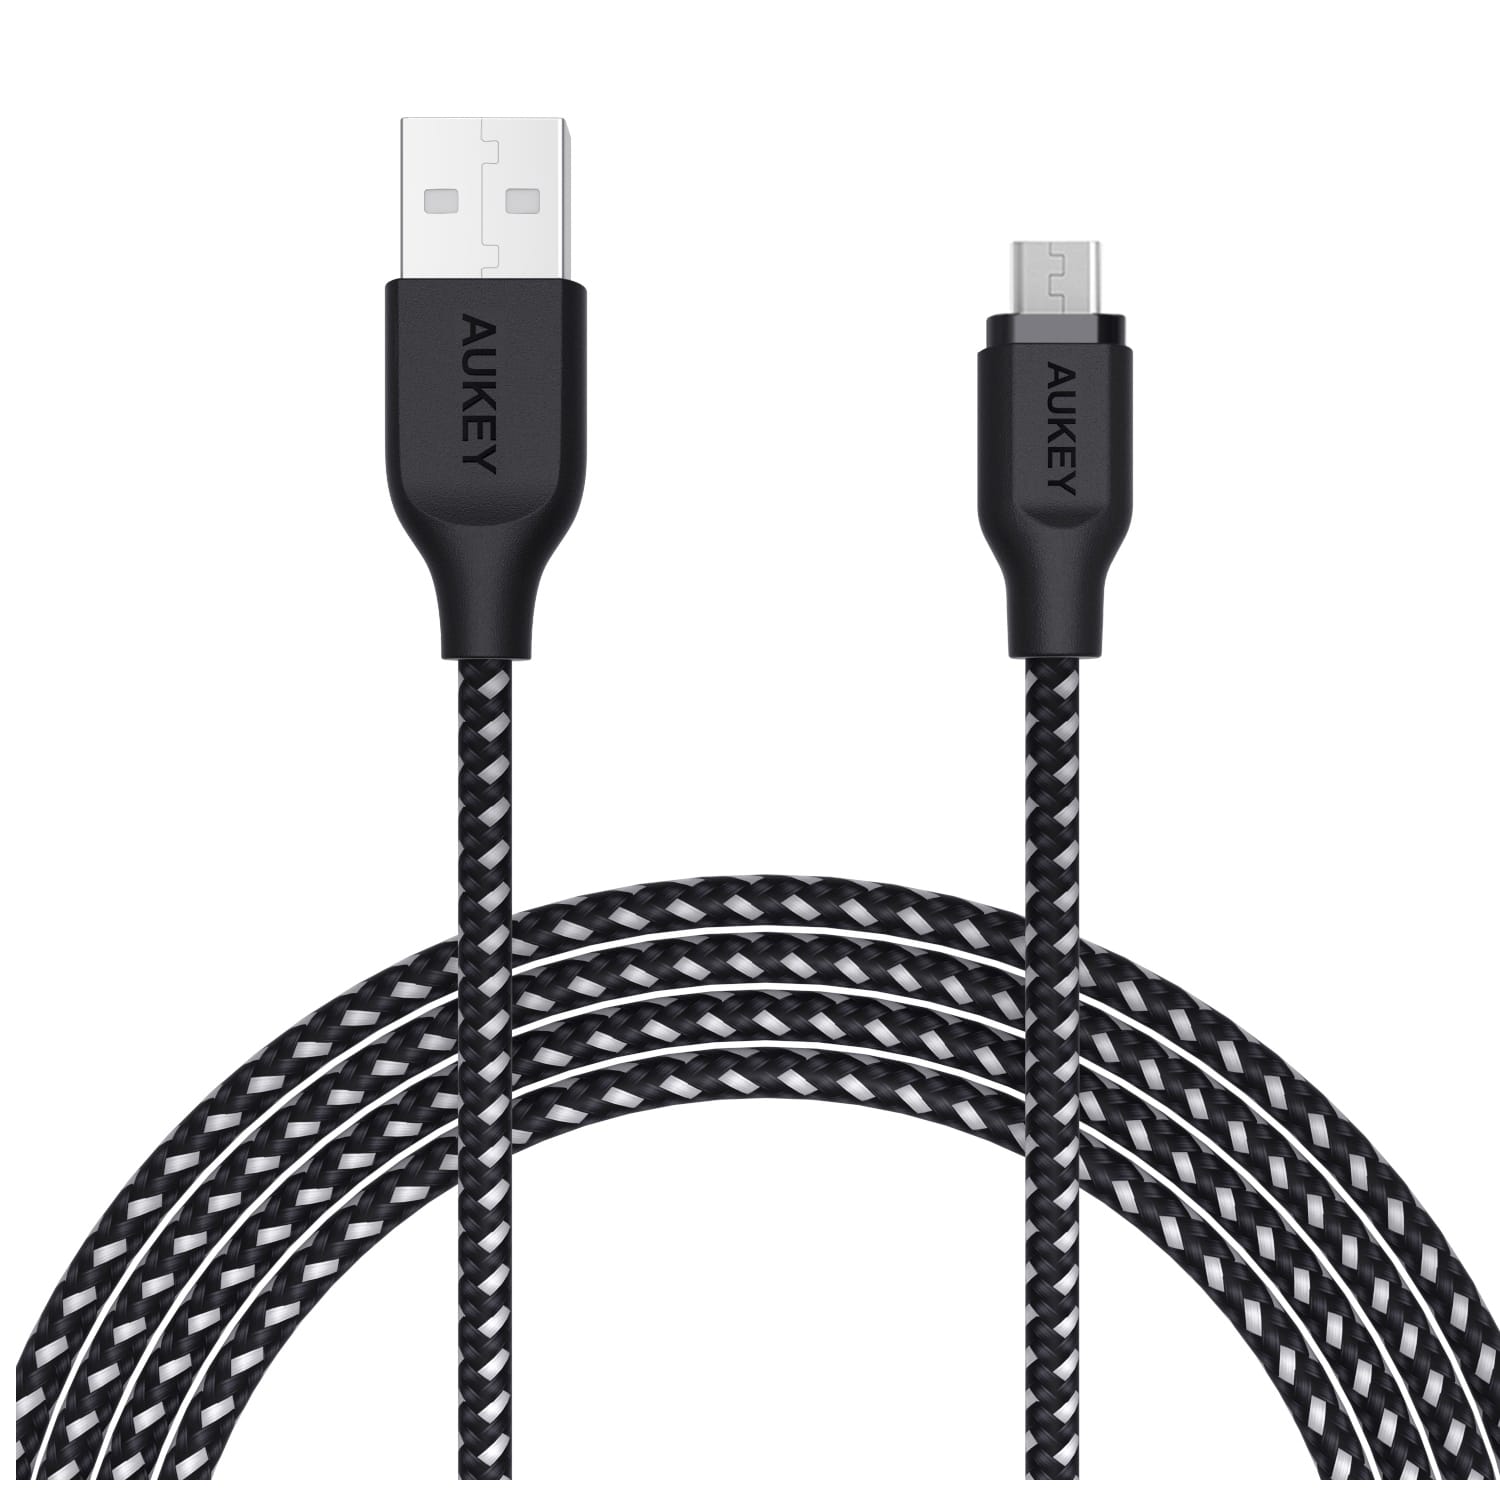 CB-AM2 Braided Nylon USB 2.0 to Micro USB Cable 2 meter